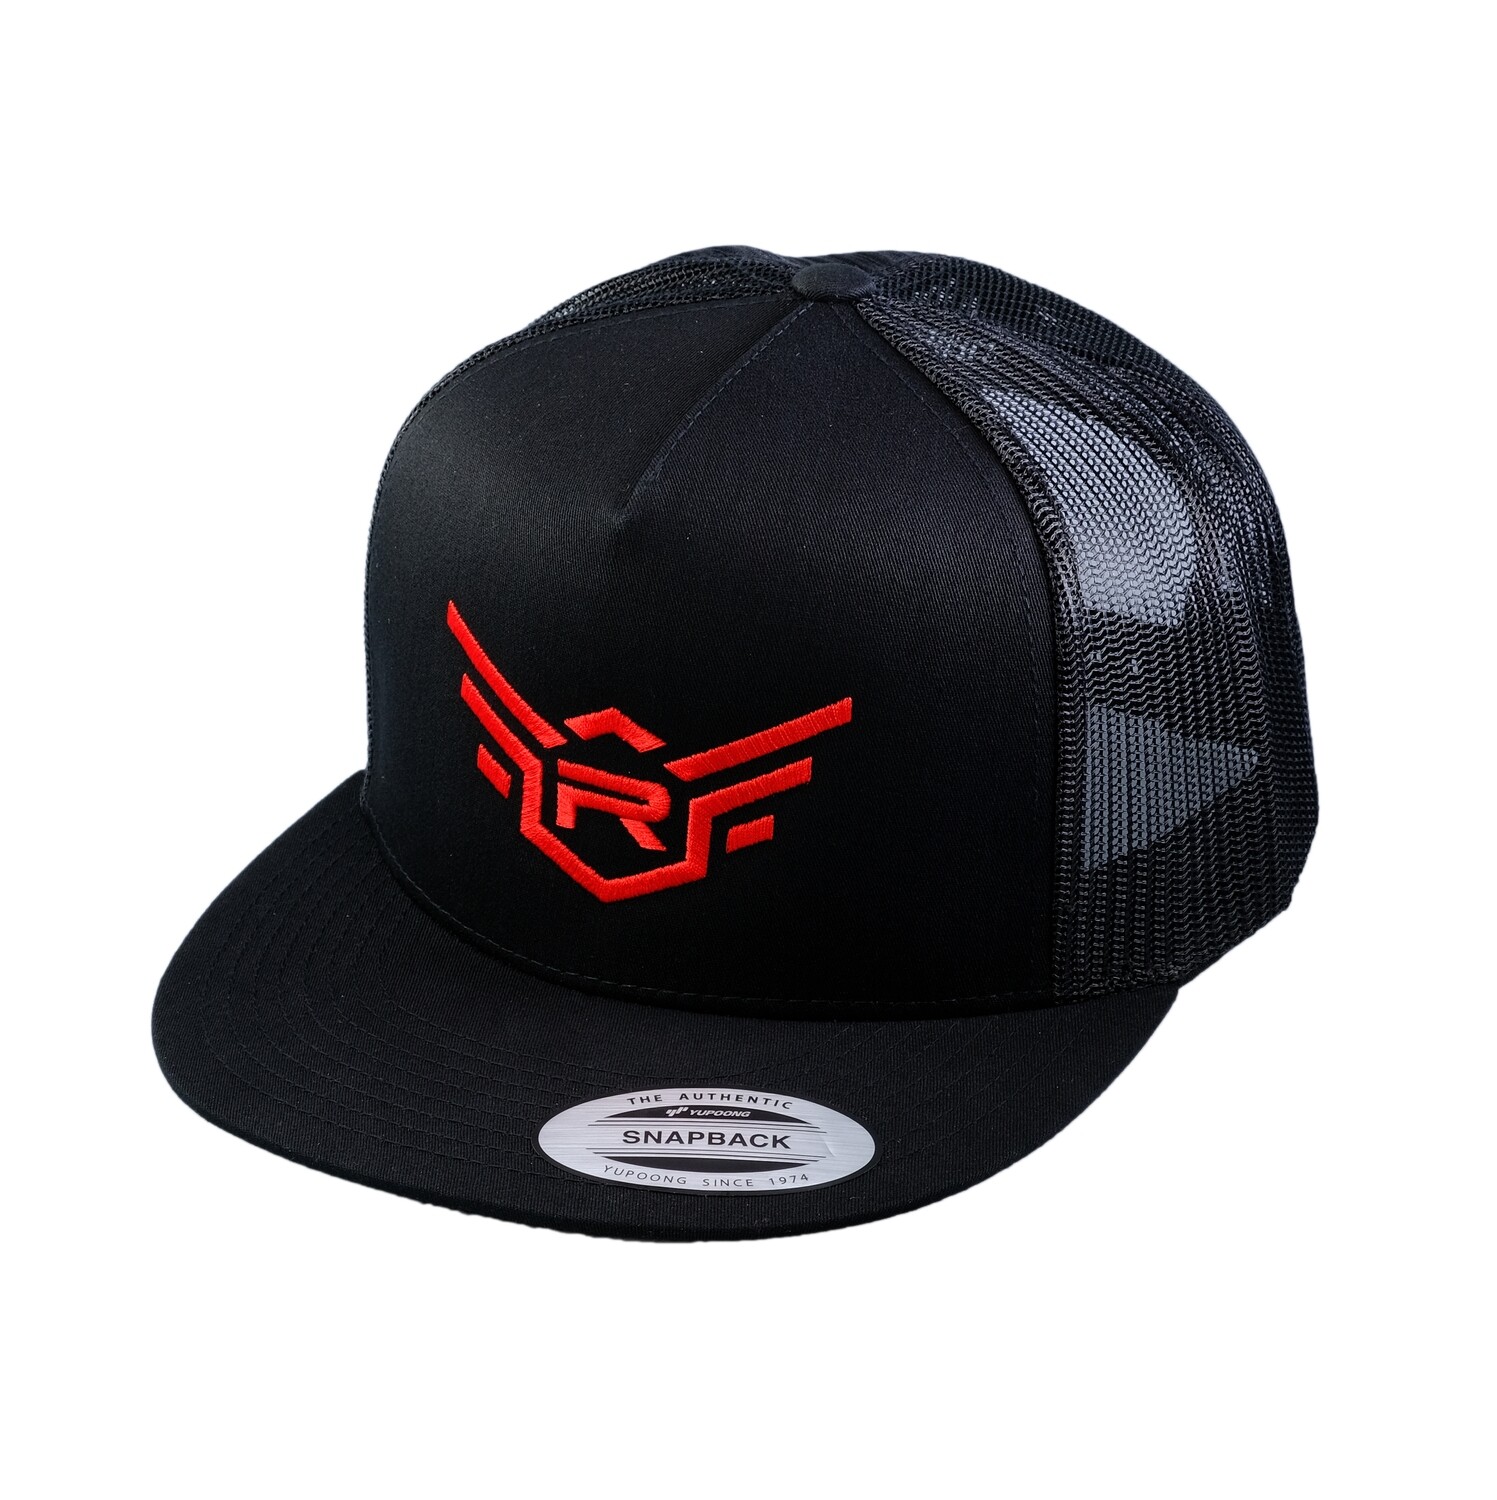 Gorra Snapback REDS “7th Collection” Negro/Rojo